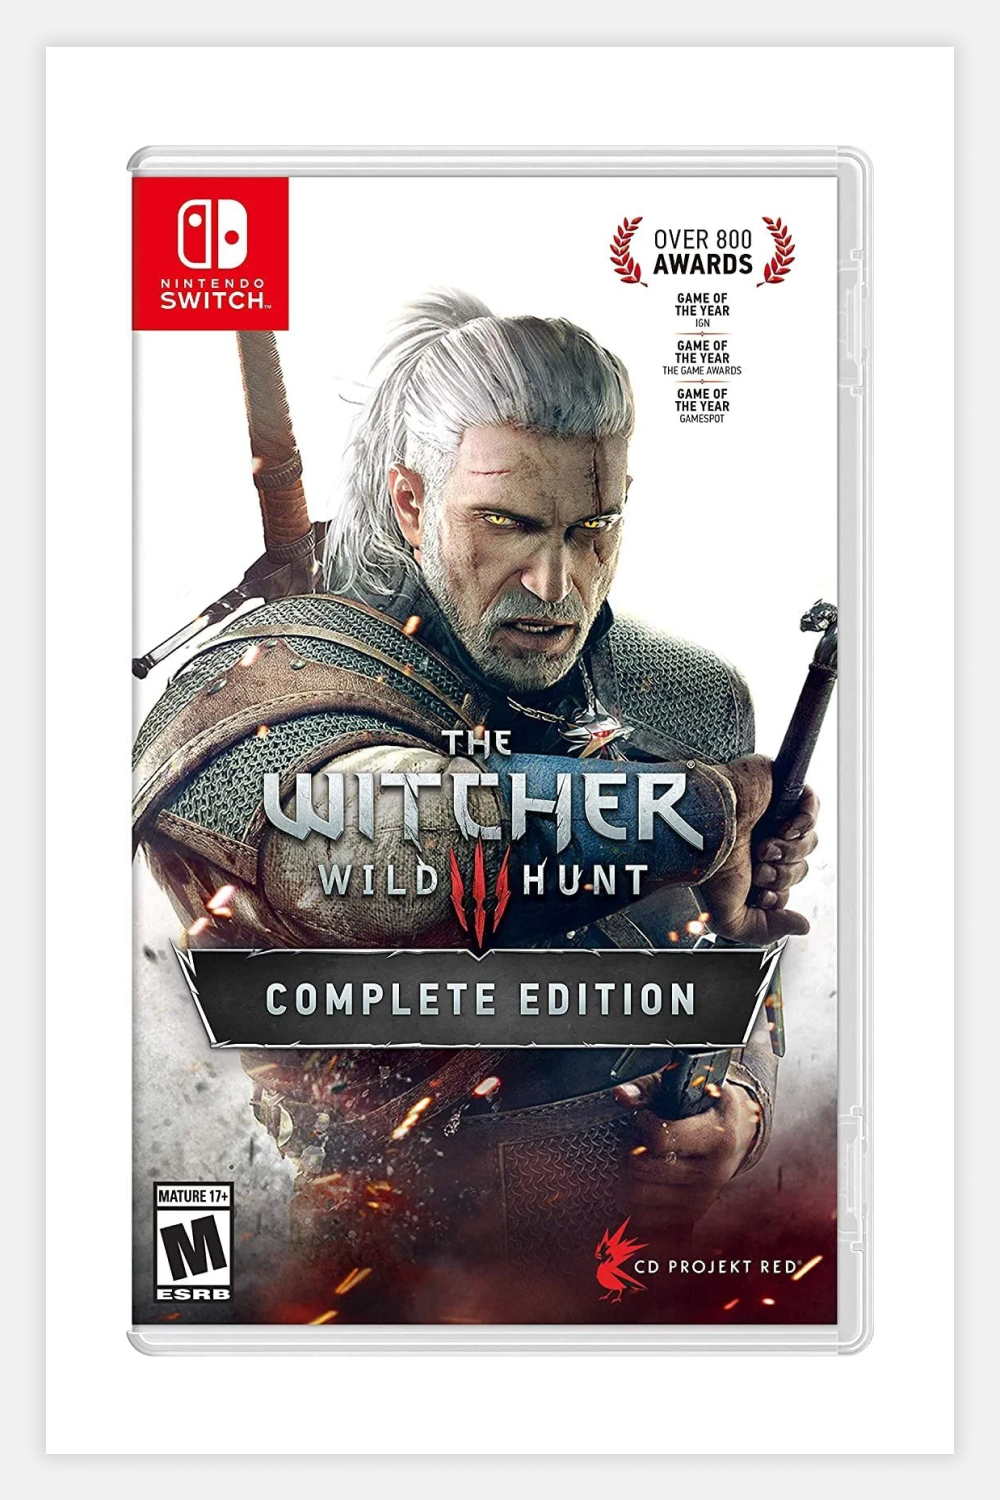 Photo of the box with Witcher 3 game.